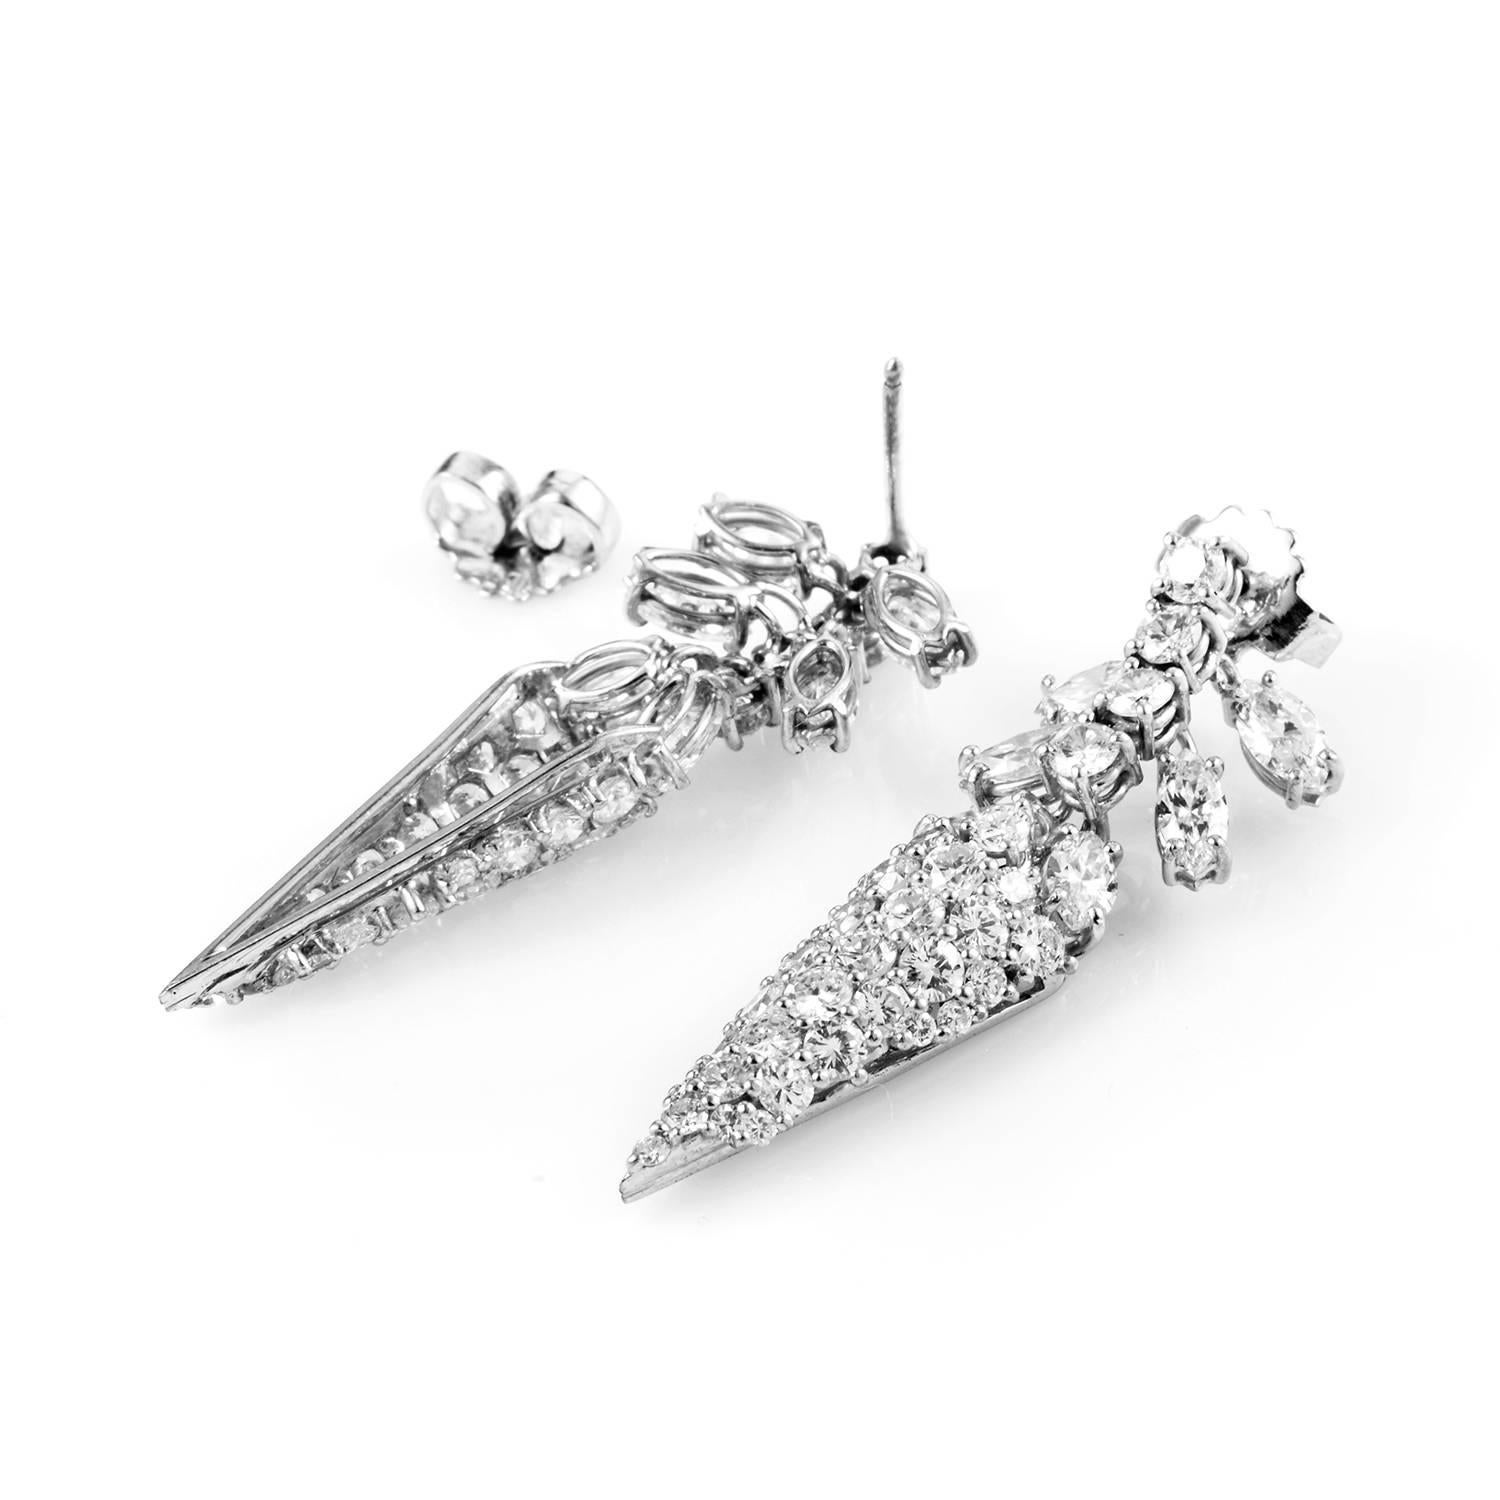 An ecstatic epitome of prestigious brilliance and scintillating glamour, this mesmerizing pair of earrings dazzles with its majestic arrangement of diamonds weighing in total 11.60 carats upon gorgeously shaped 18K white gold.
Retail Price: